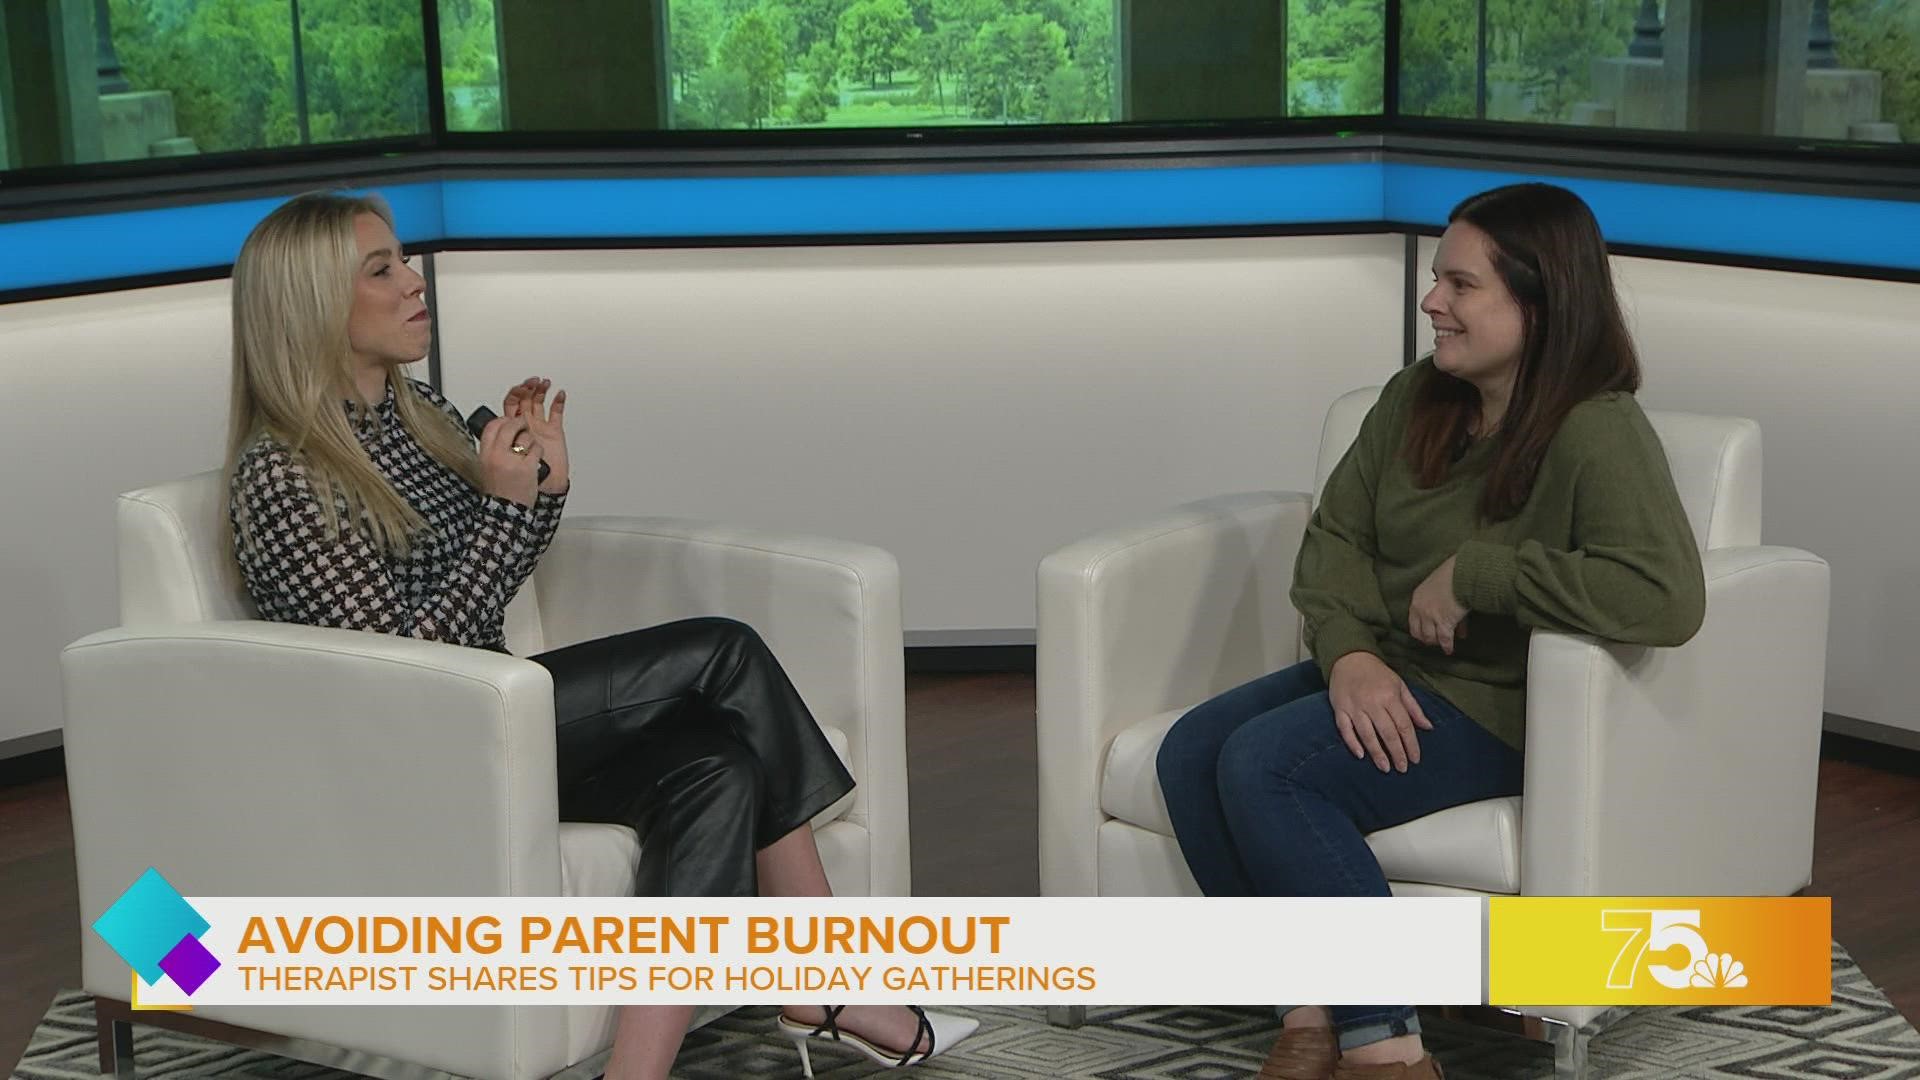 Stacy McCann of Present Moment Counseling shares tips for avoiding parent burnout around the holidays.